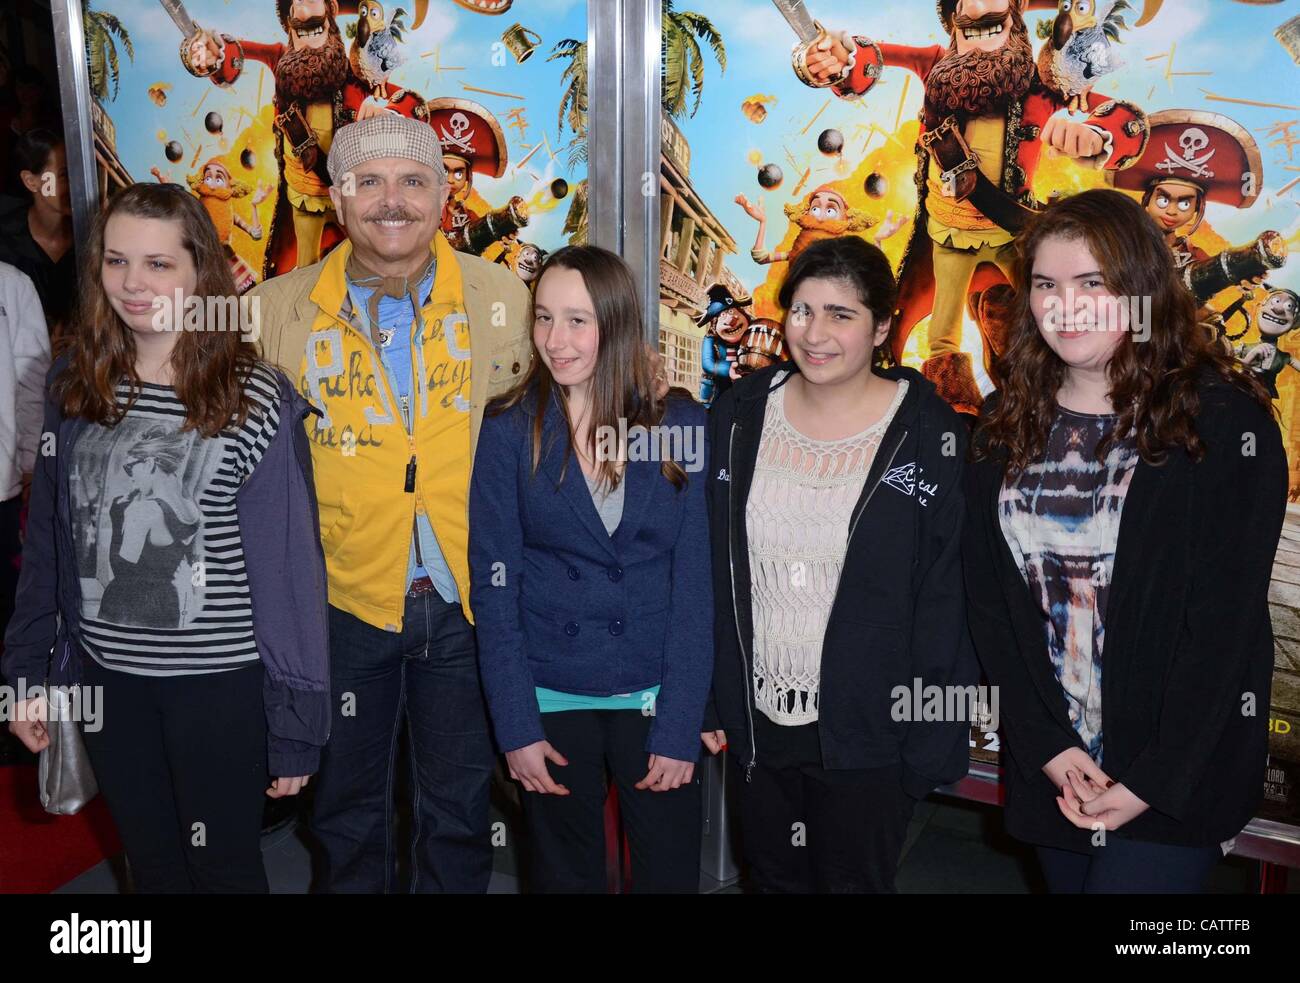 Joe Pantoliano and his daughters at arrivals for The Pirates: Band of Misfits Premiere, AMC Empire, New York, NY April 22, 2012. Photo By: Derek Storm/Everett Collection Credit Line : Credit:  Everett Collection Inc / Alamy Live News. Stock Photo